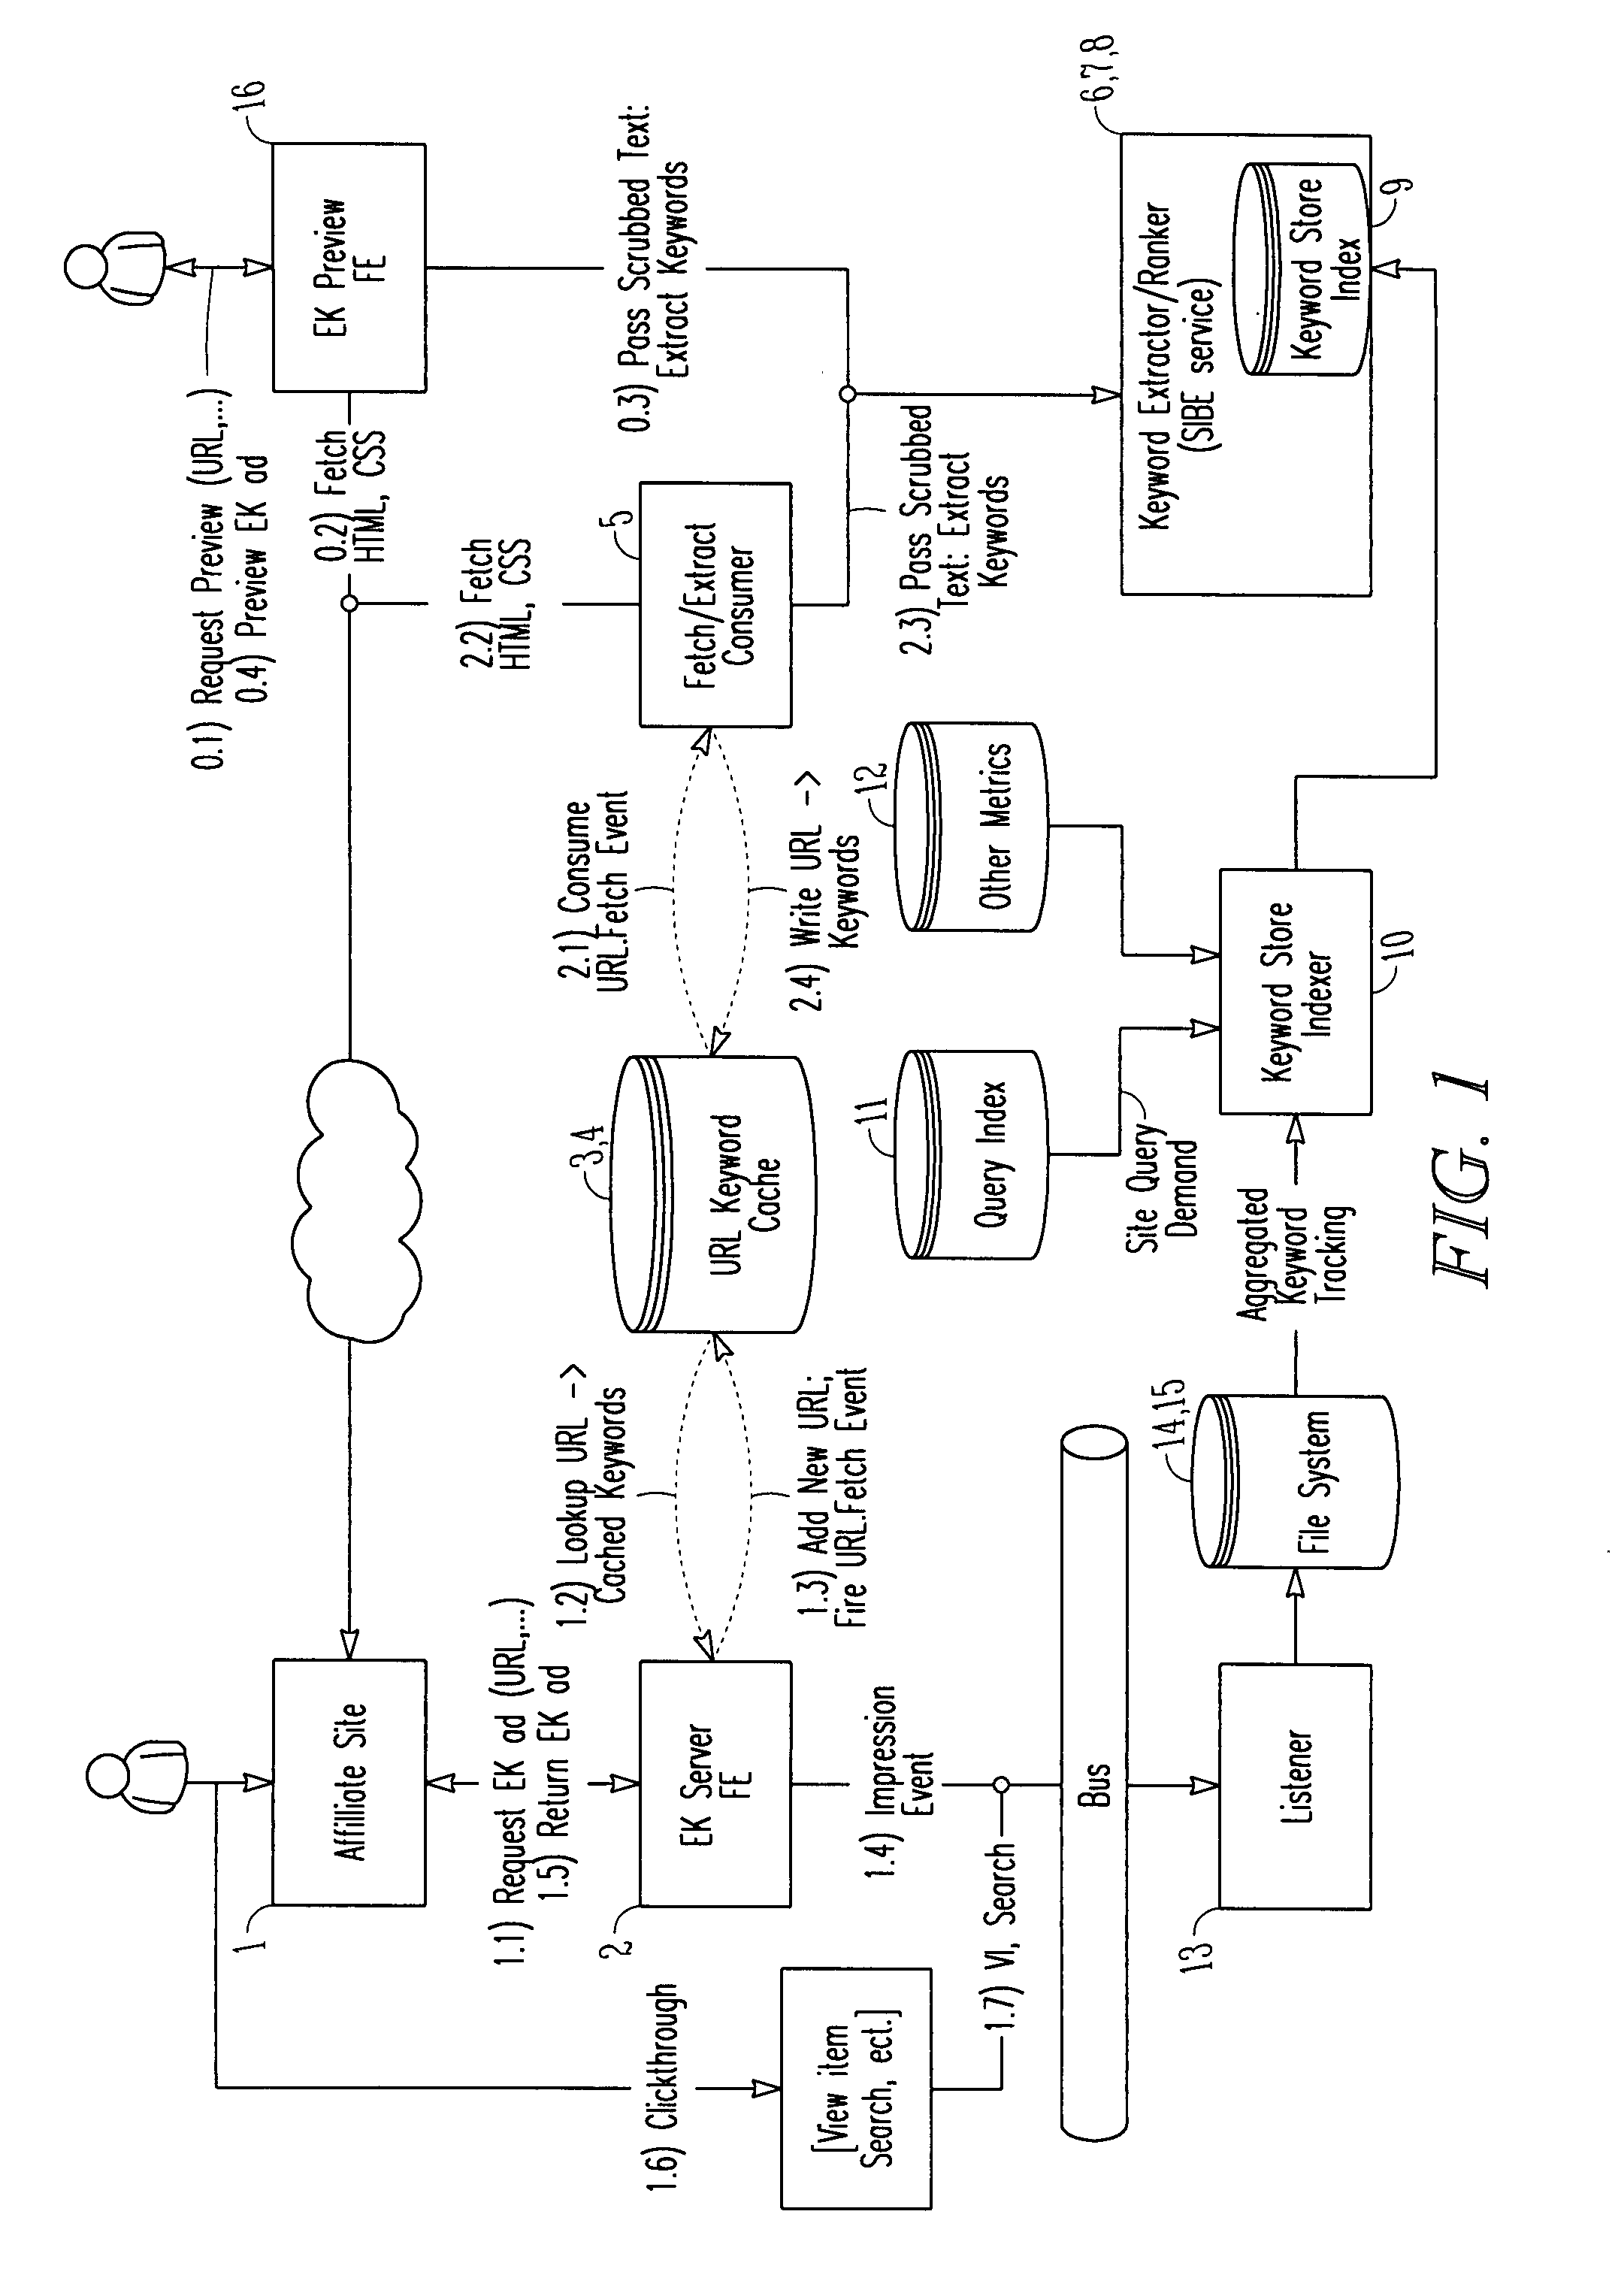 System and method for contextual advertisement and merchandizing based on an automatically generated user demographic profile